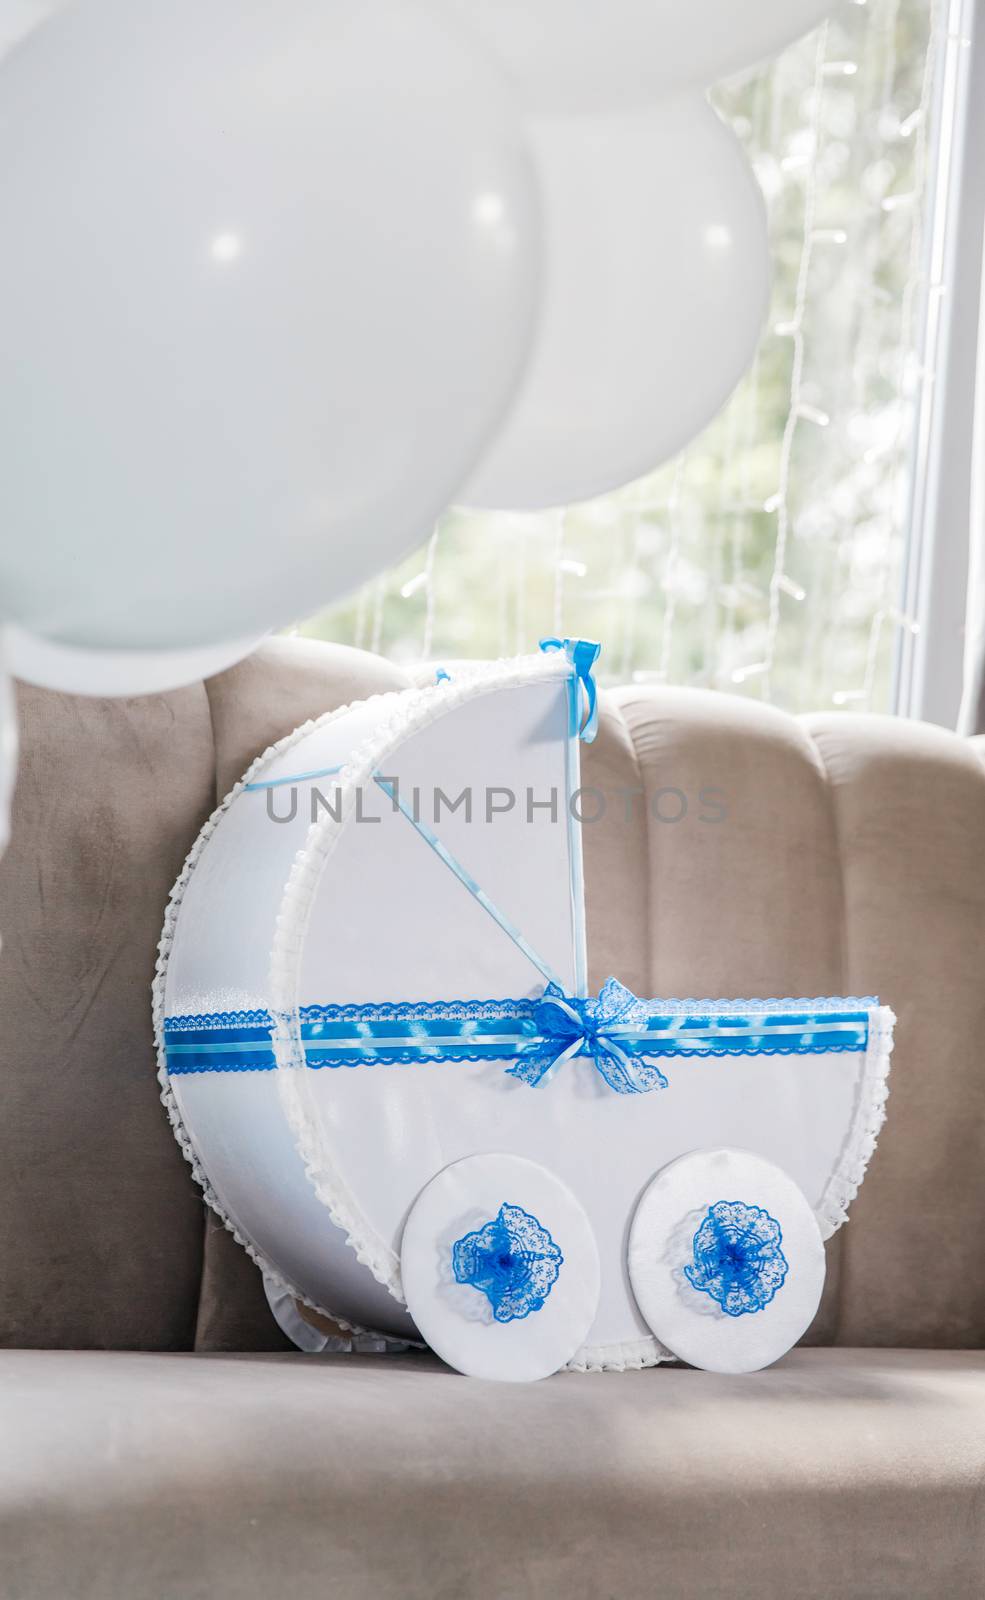 Blue paper carriage decor with balloons